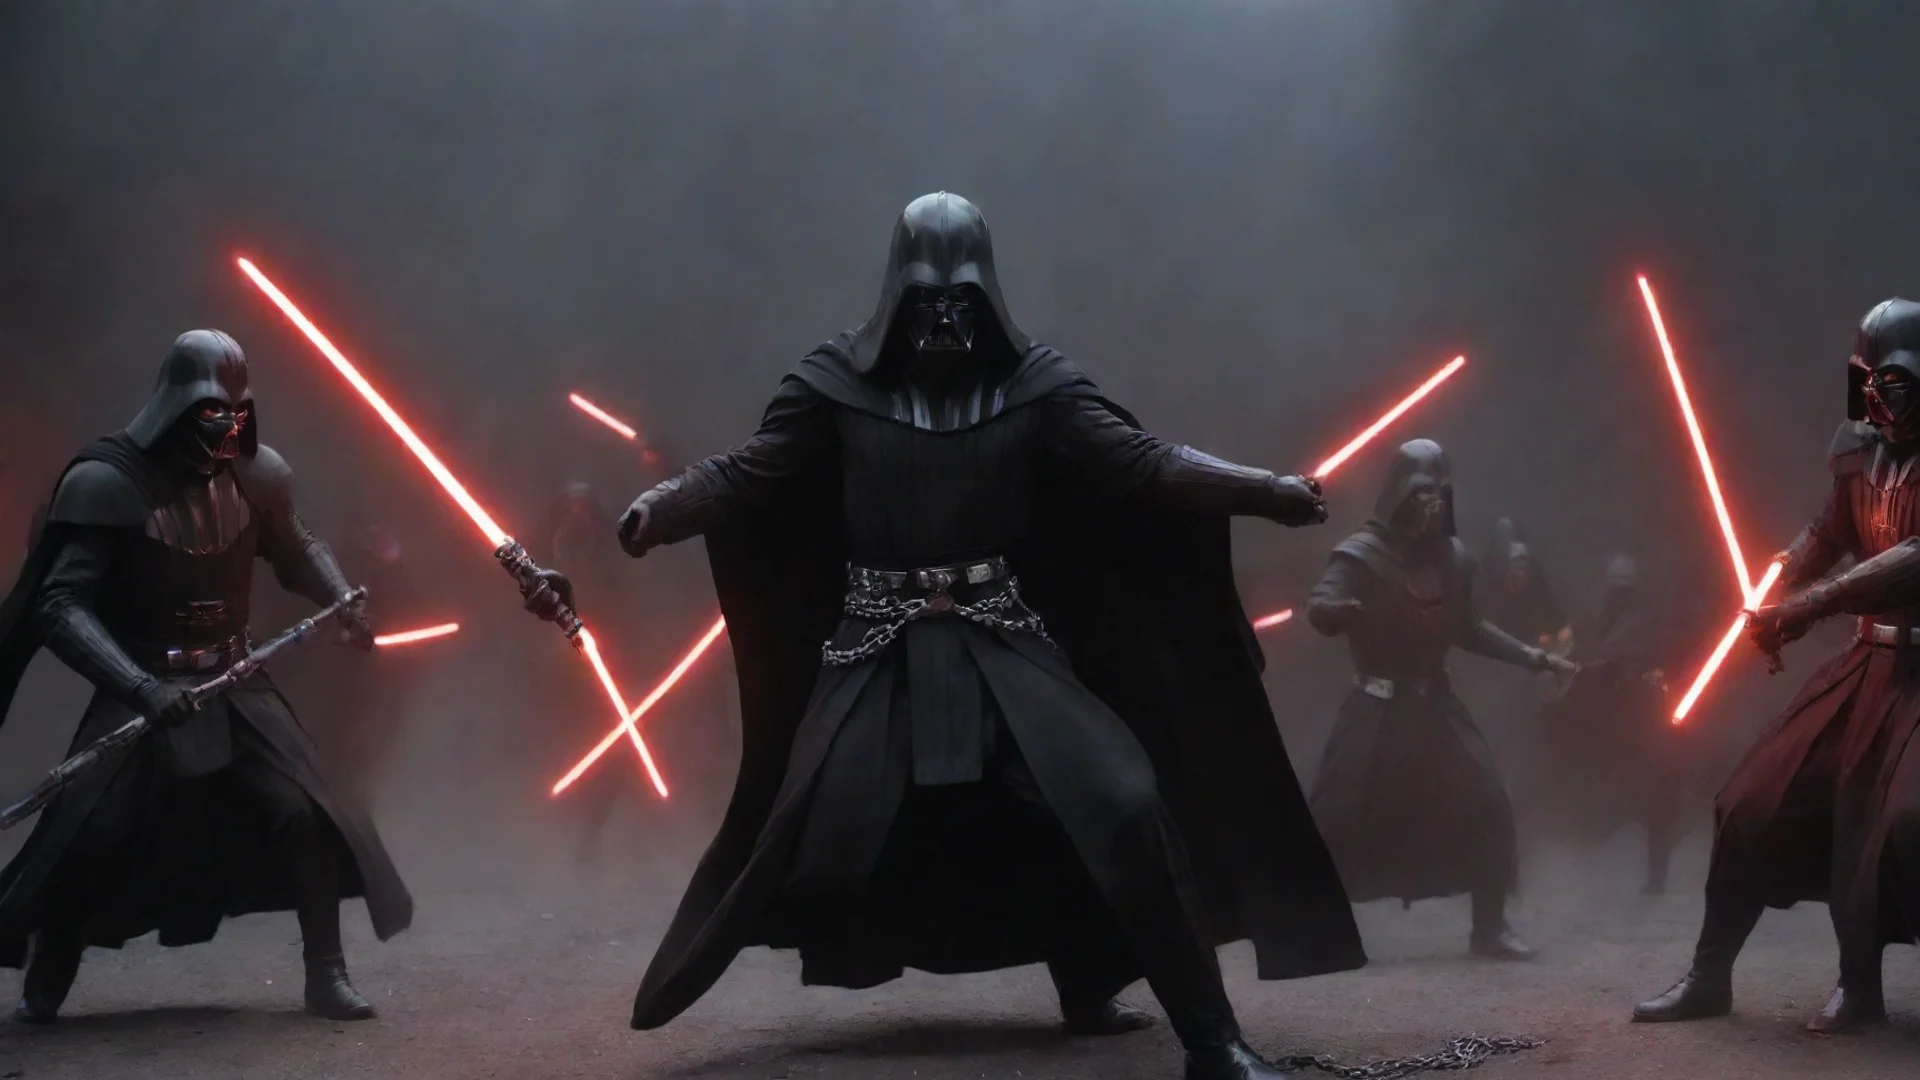 amazing sith lords attacking a metal chain awesome portrait 2 wide